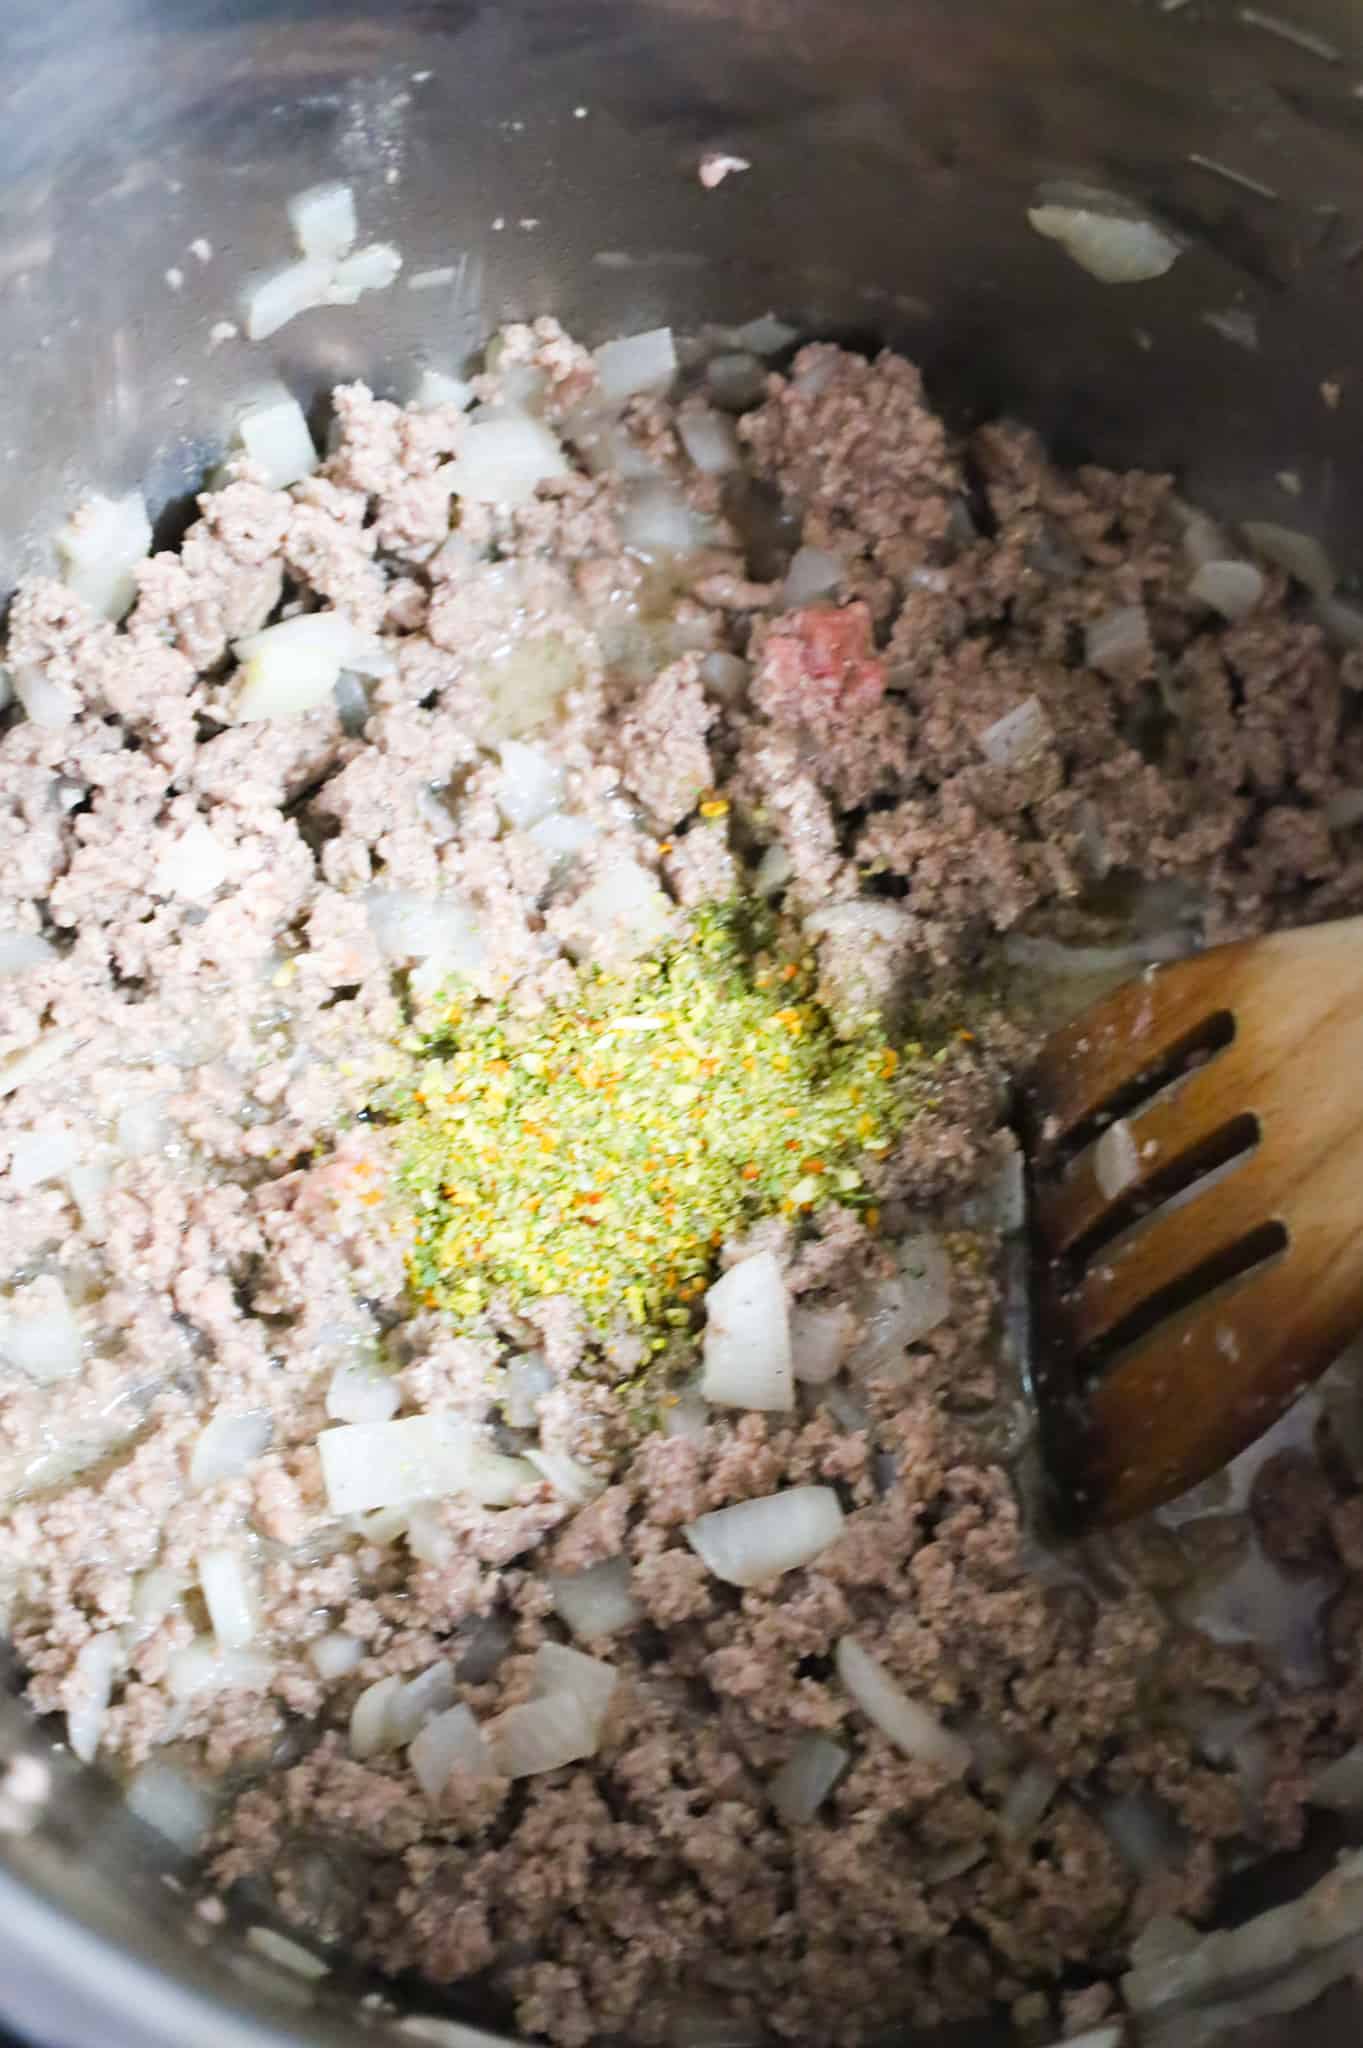 Italian seasoning, salt and pepper on top of cooked ground beef and diced onion mixture in an Instant Pot